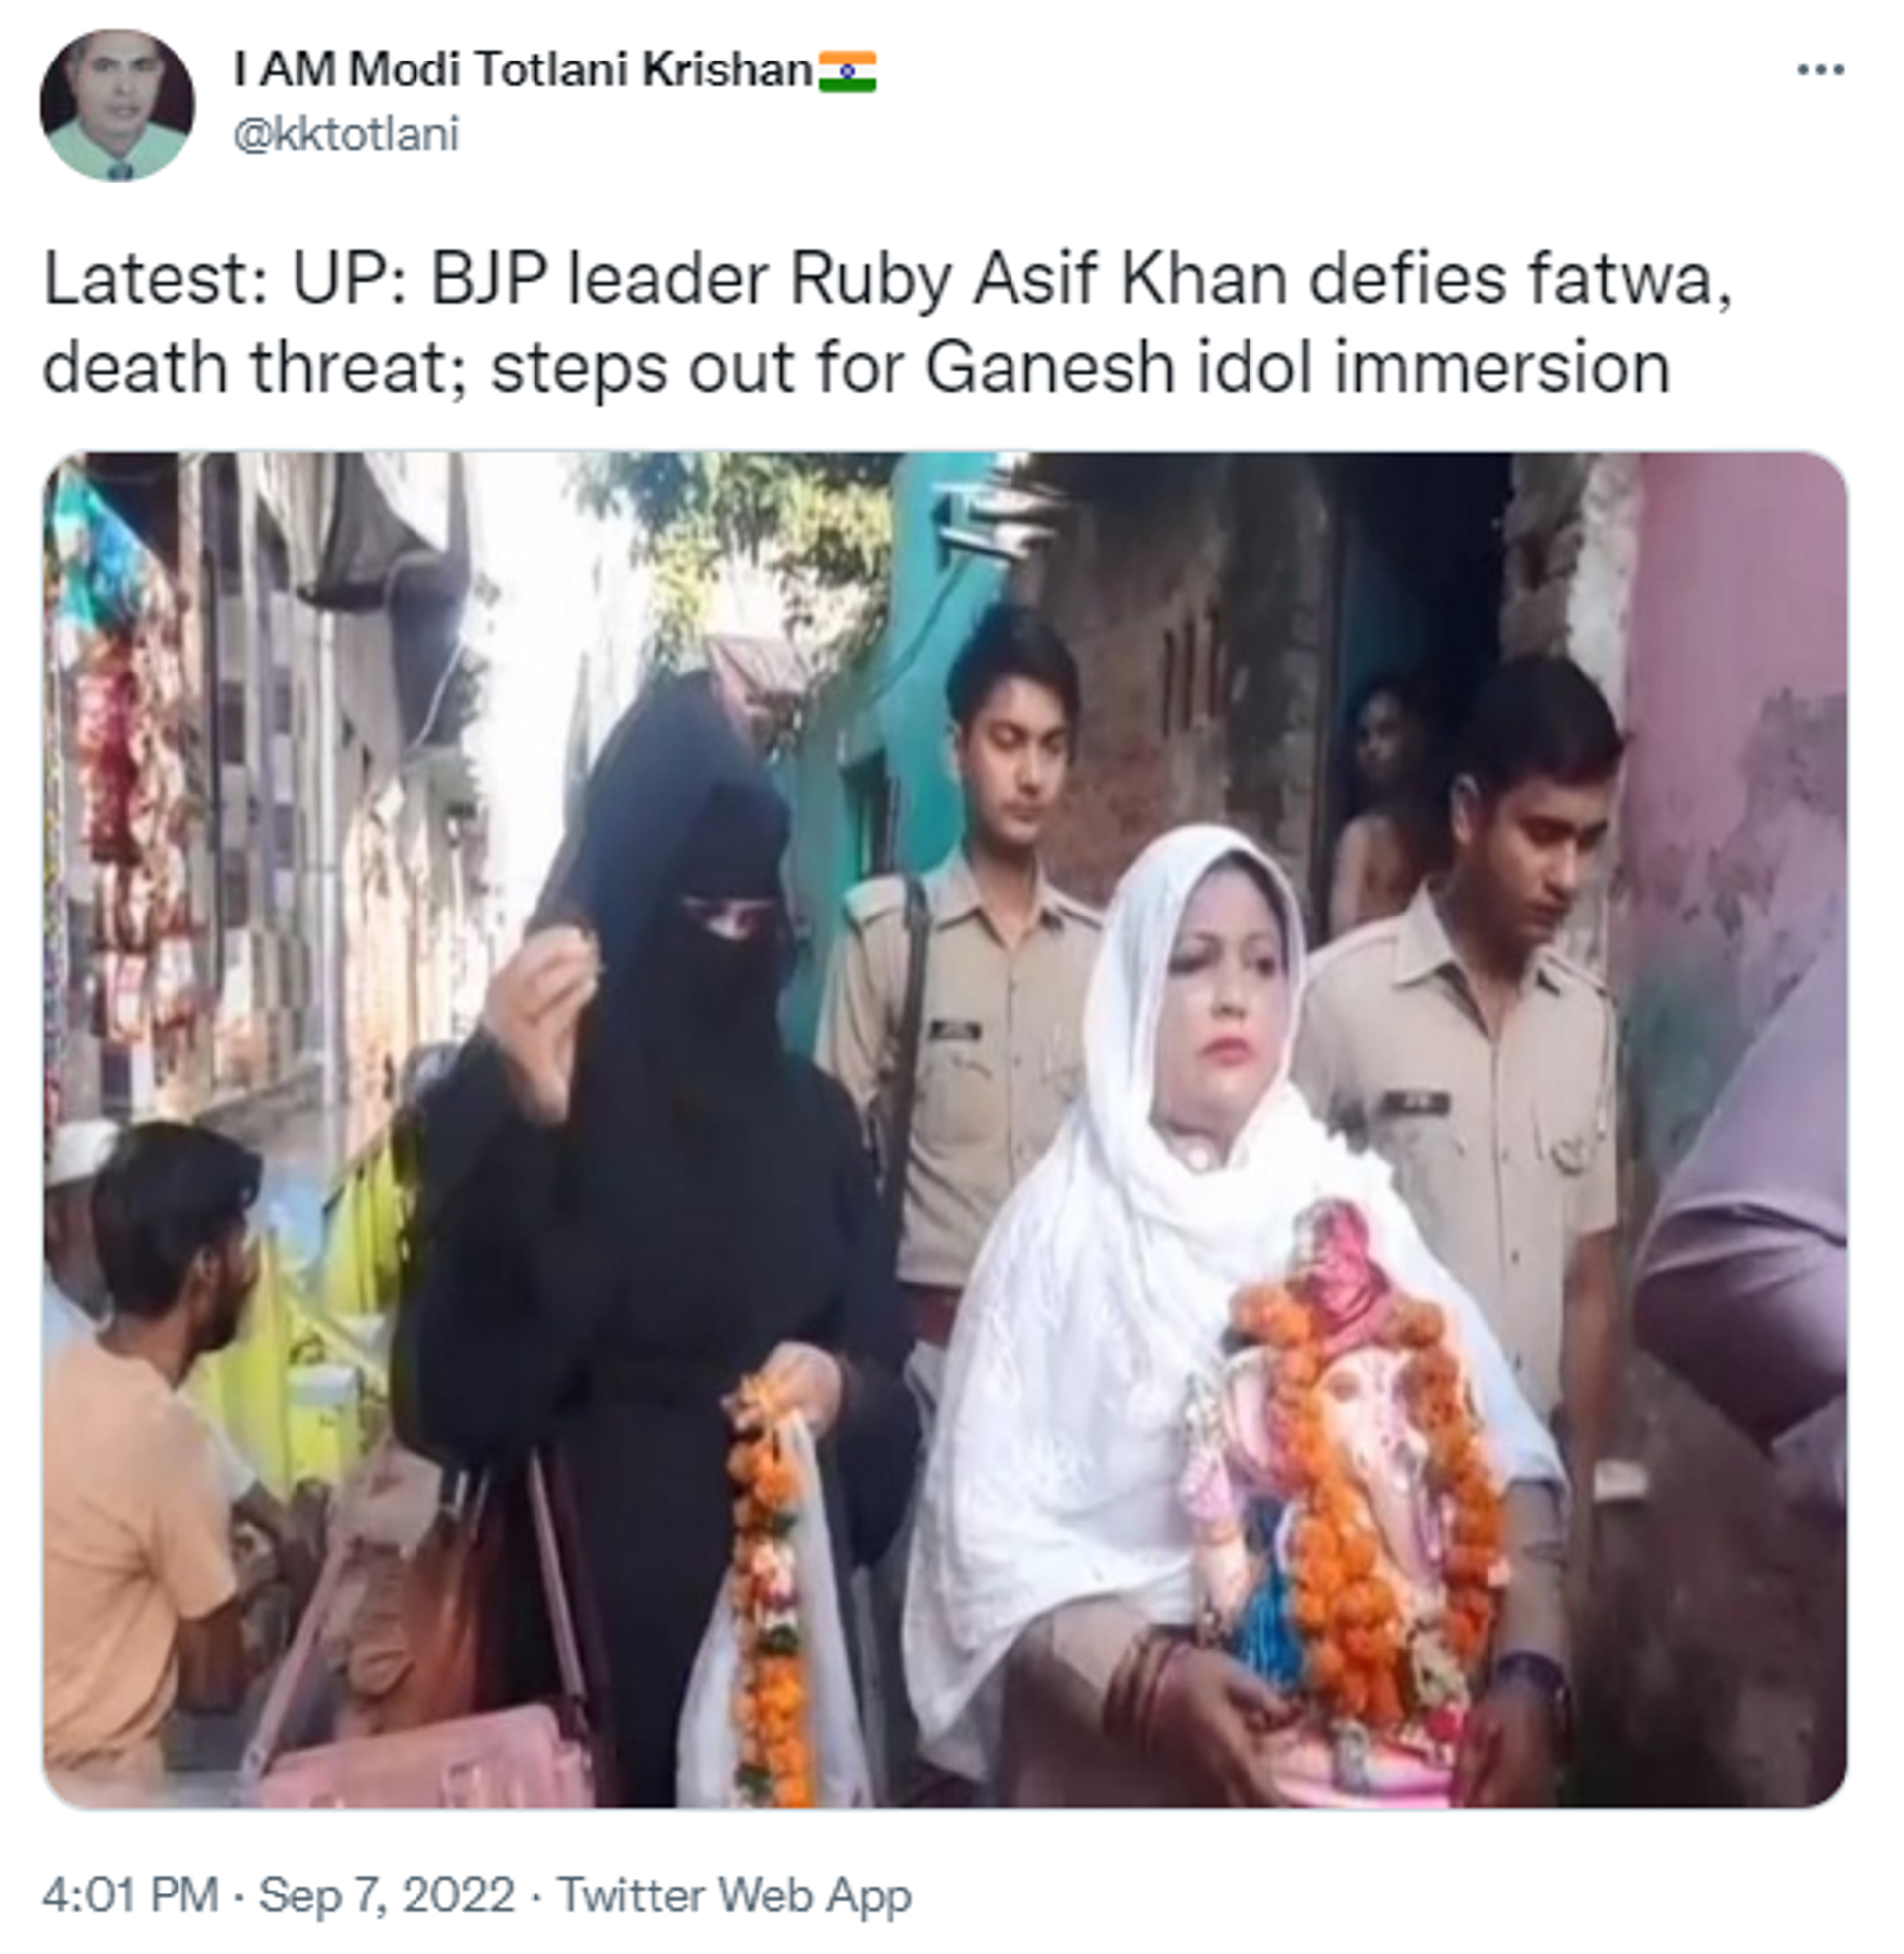 BJP Politician Ruby Asif Khan Defies Death Threat and Steps Out to Immerse Lord Ganesha Idol - Sputnik International, 1920, 07.09.2022